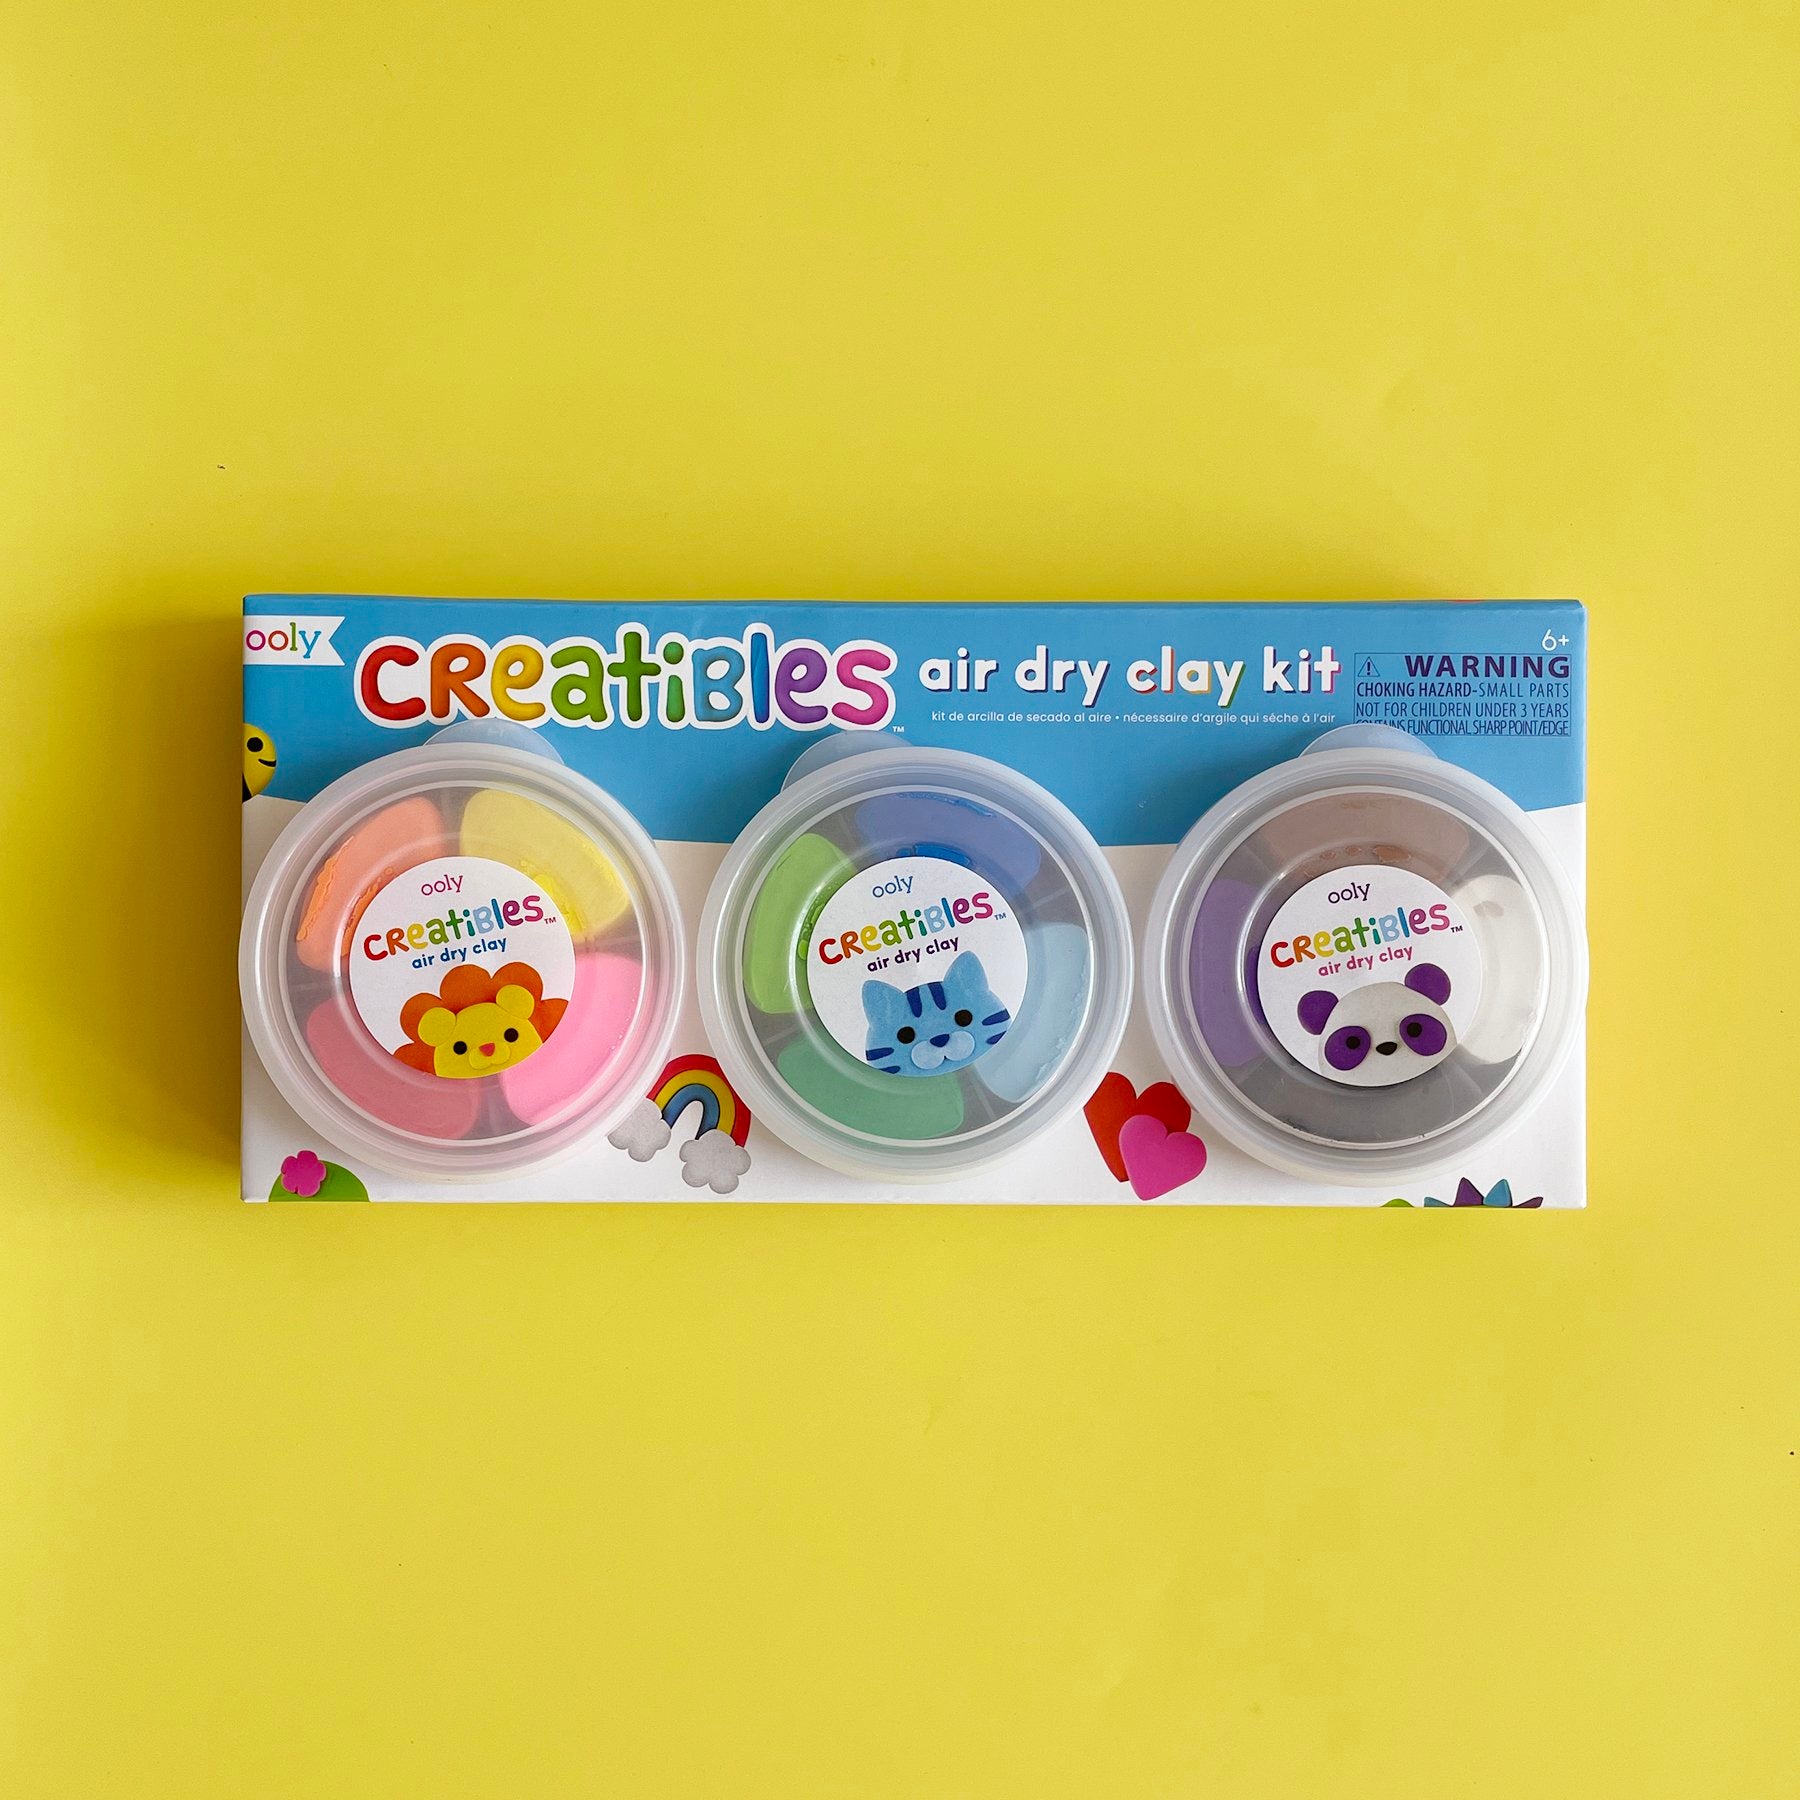 How To Create: Creatibles DIY Air Dry Clay Kit